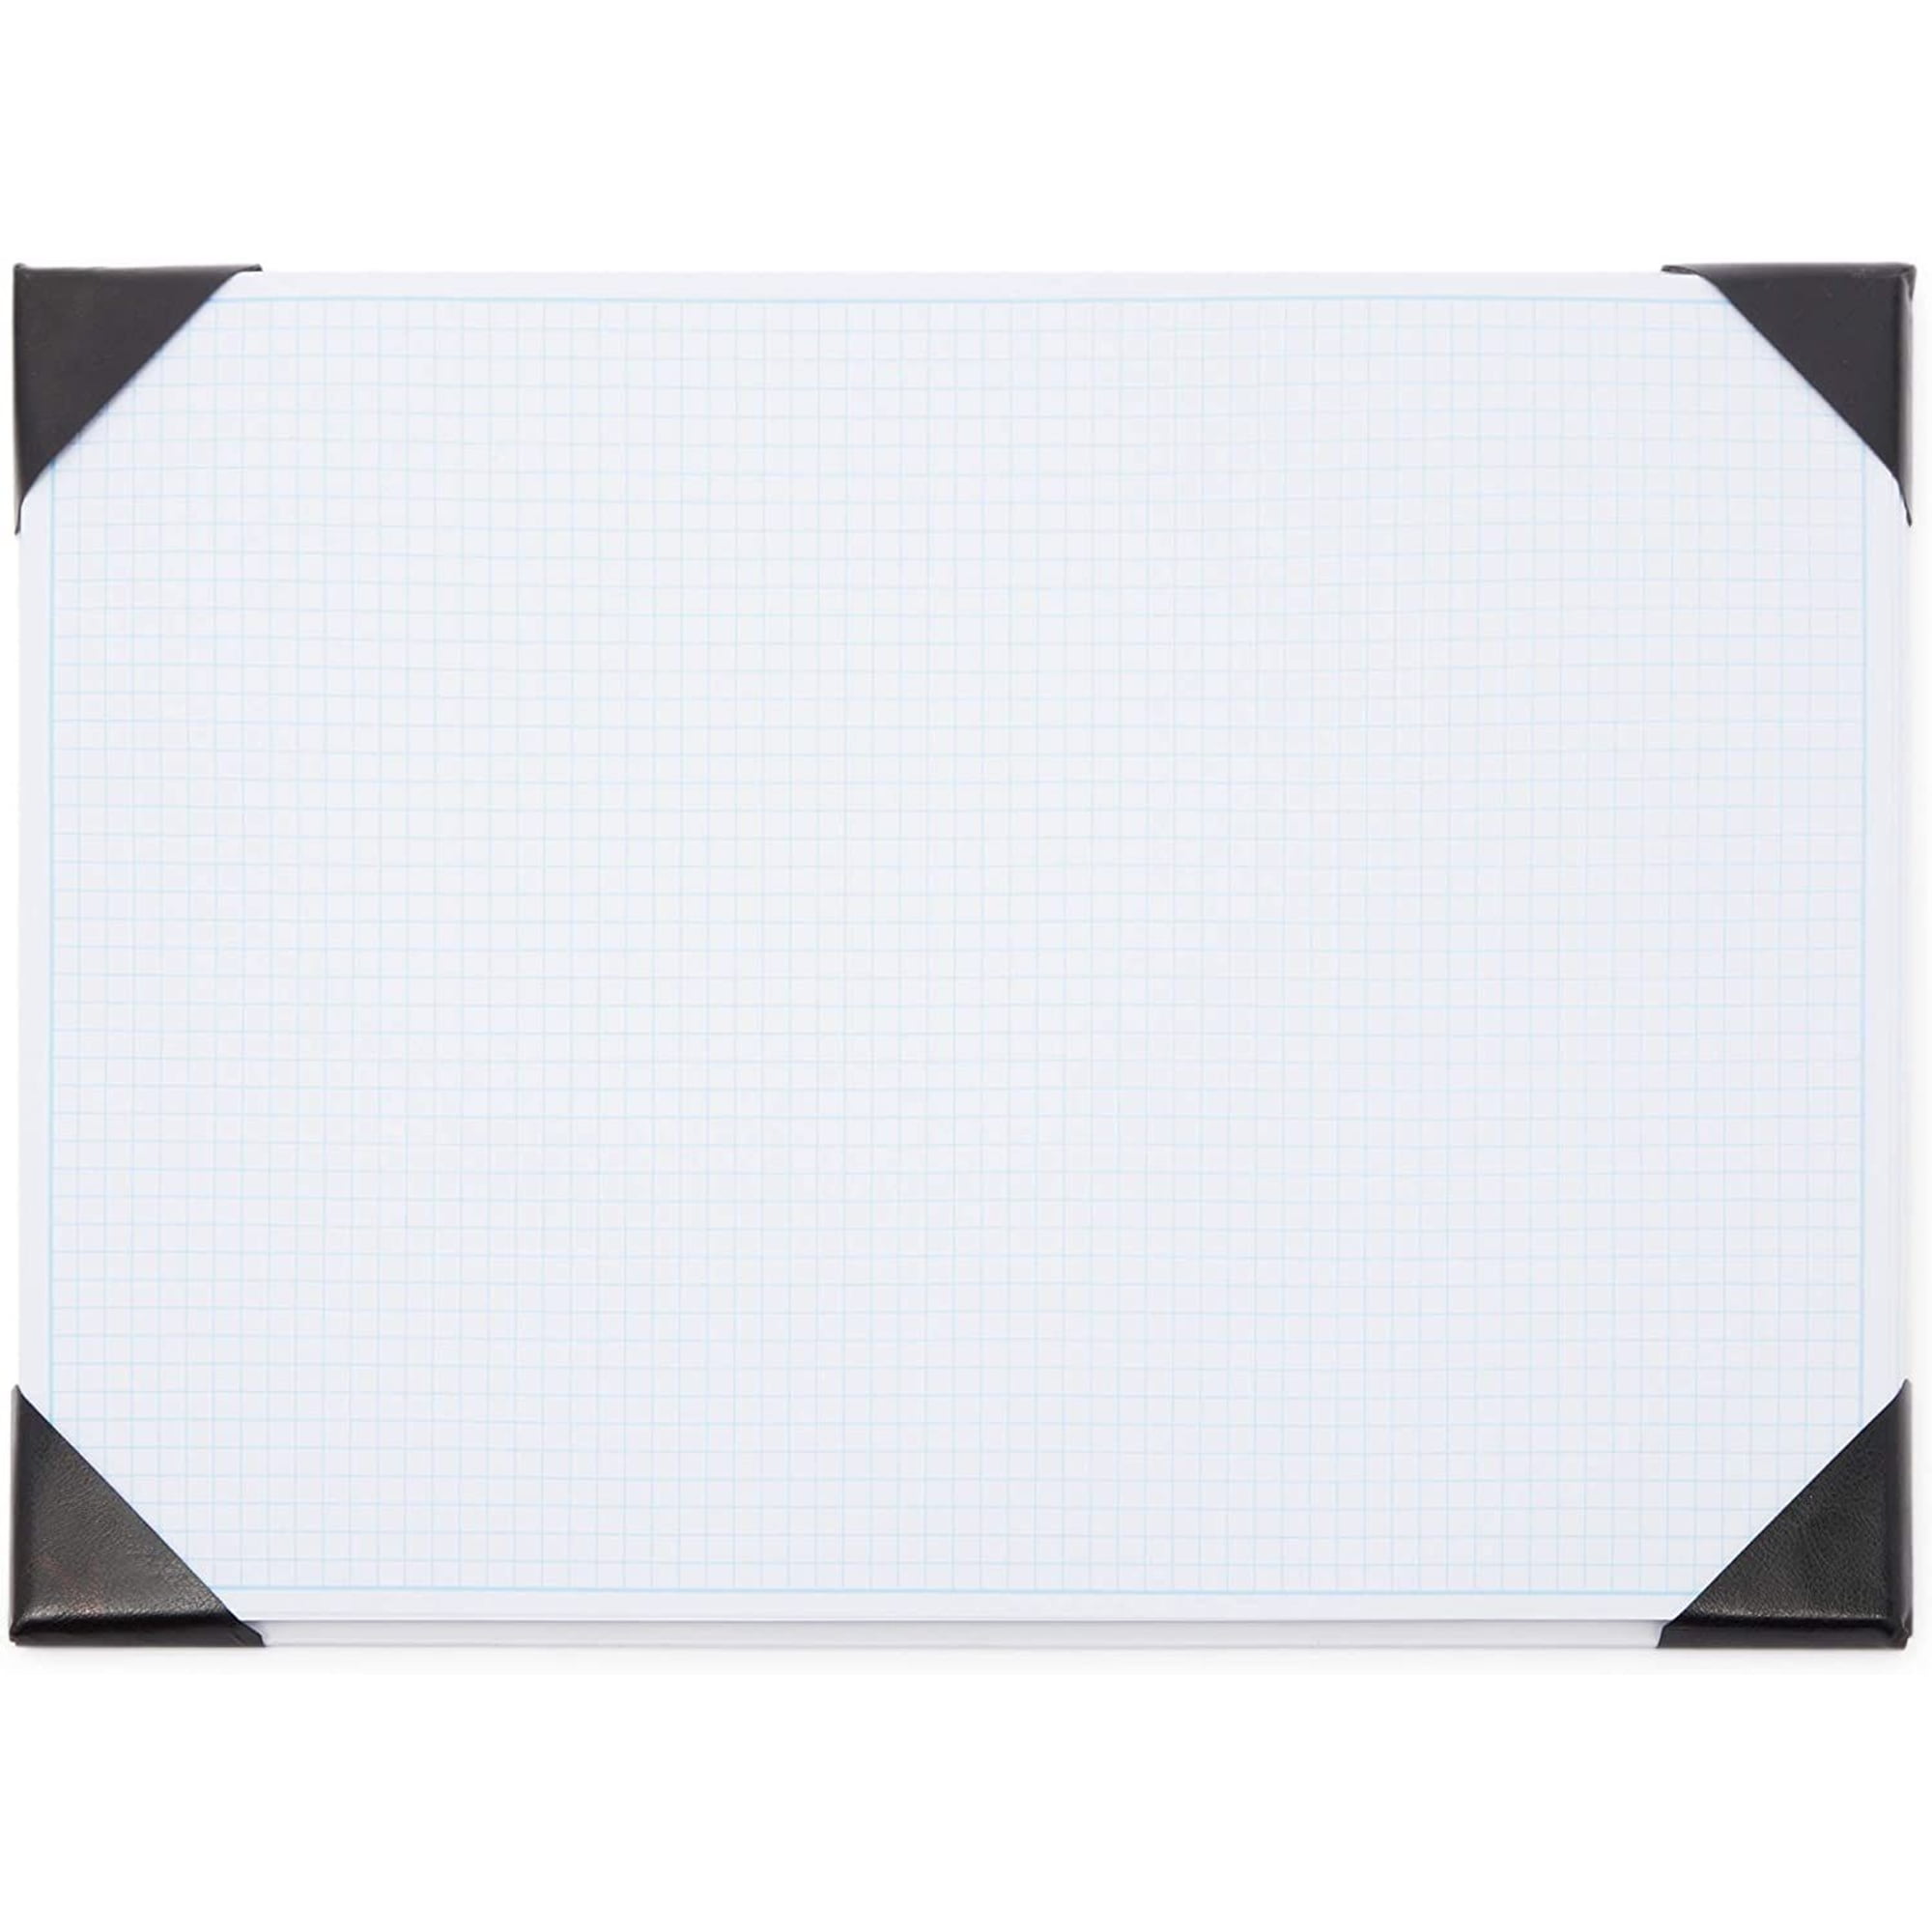 Large Desk Blotter Paper Pad, Graph Notepad for Office Supplies, Refillable  50 Sheets (17 x 12 In)